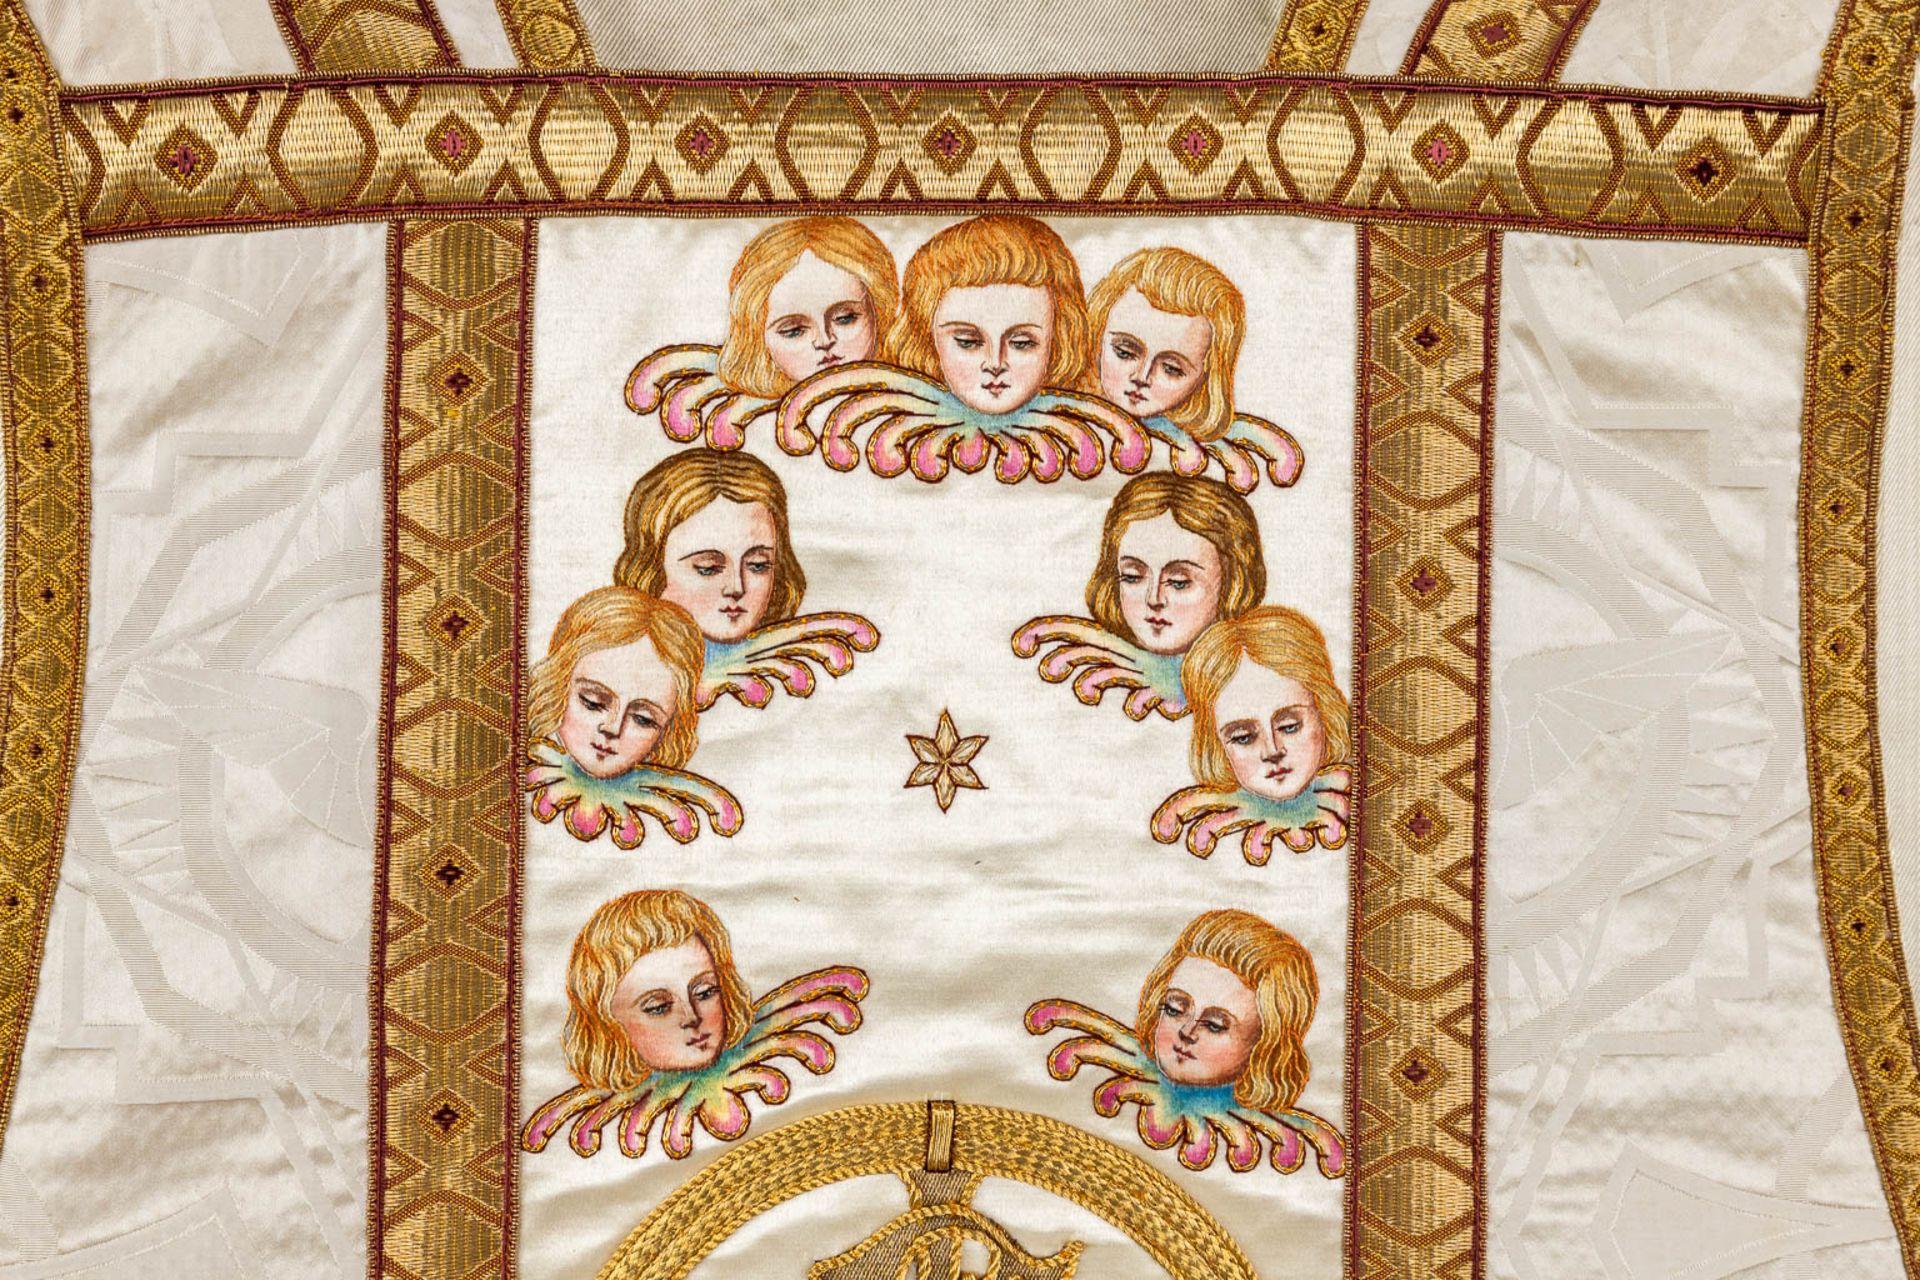 A set of Lithurgical Robes and accessories. Thick gold thread and embroideries. - Image 8 of 40